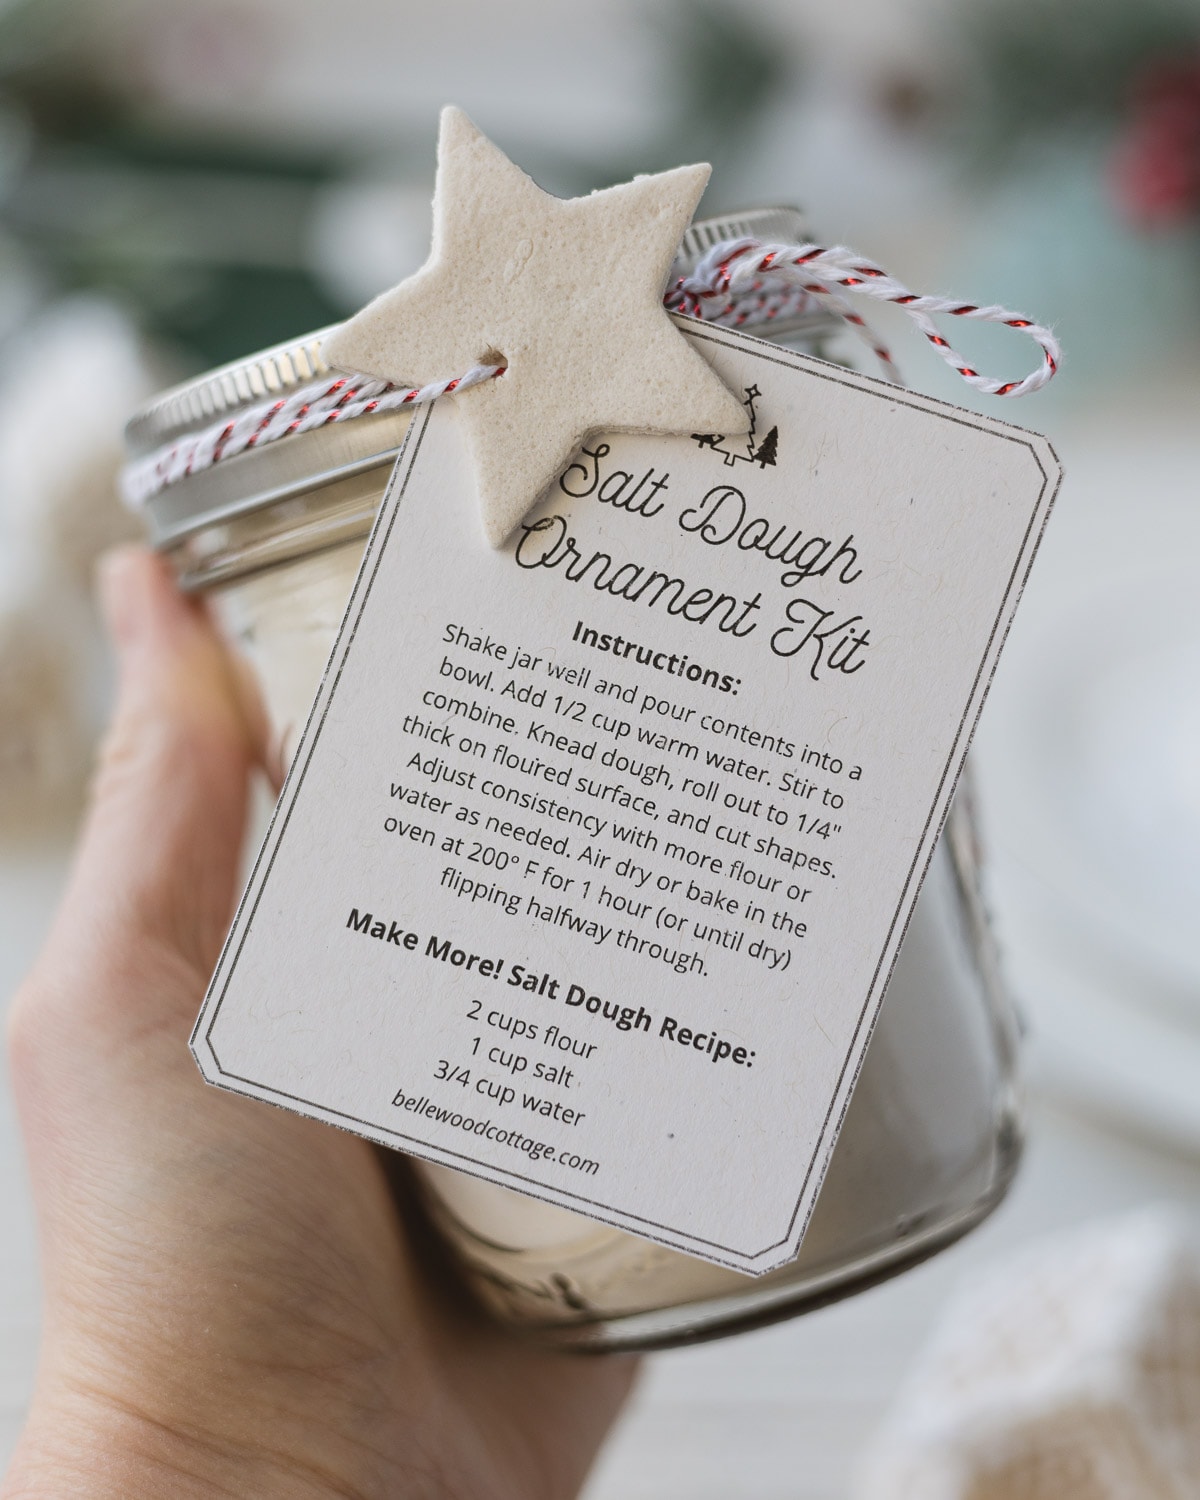 A hand holding a DIY salt dough ornament kit with a gift tag attached.